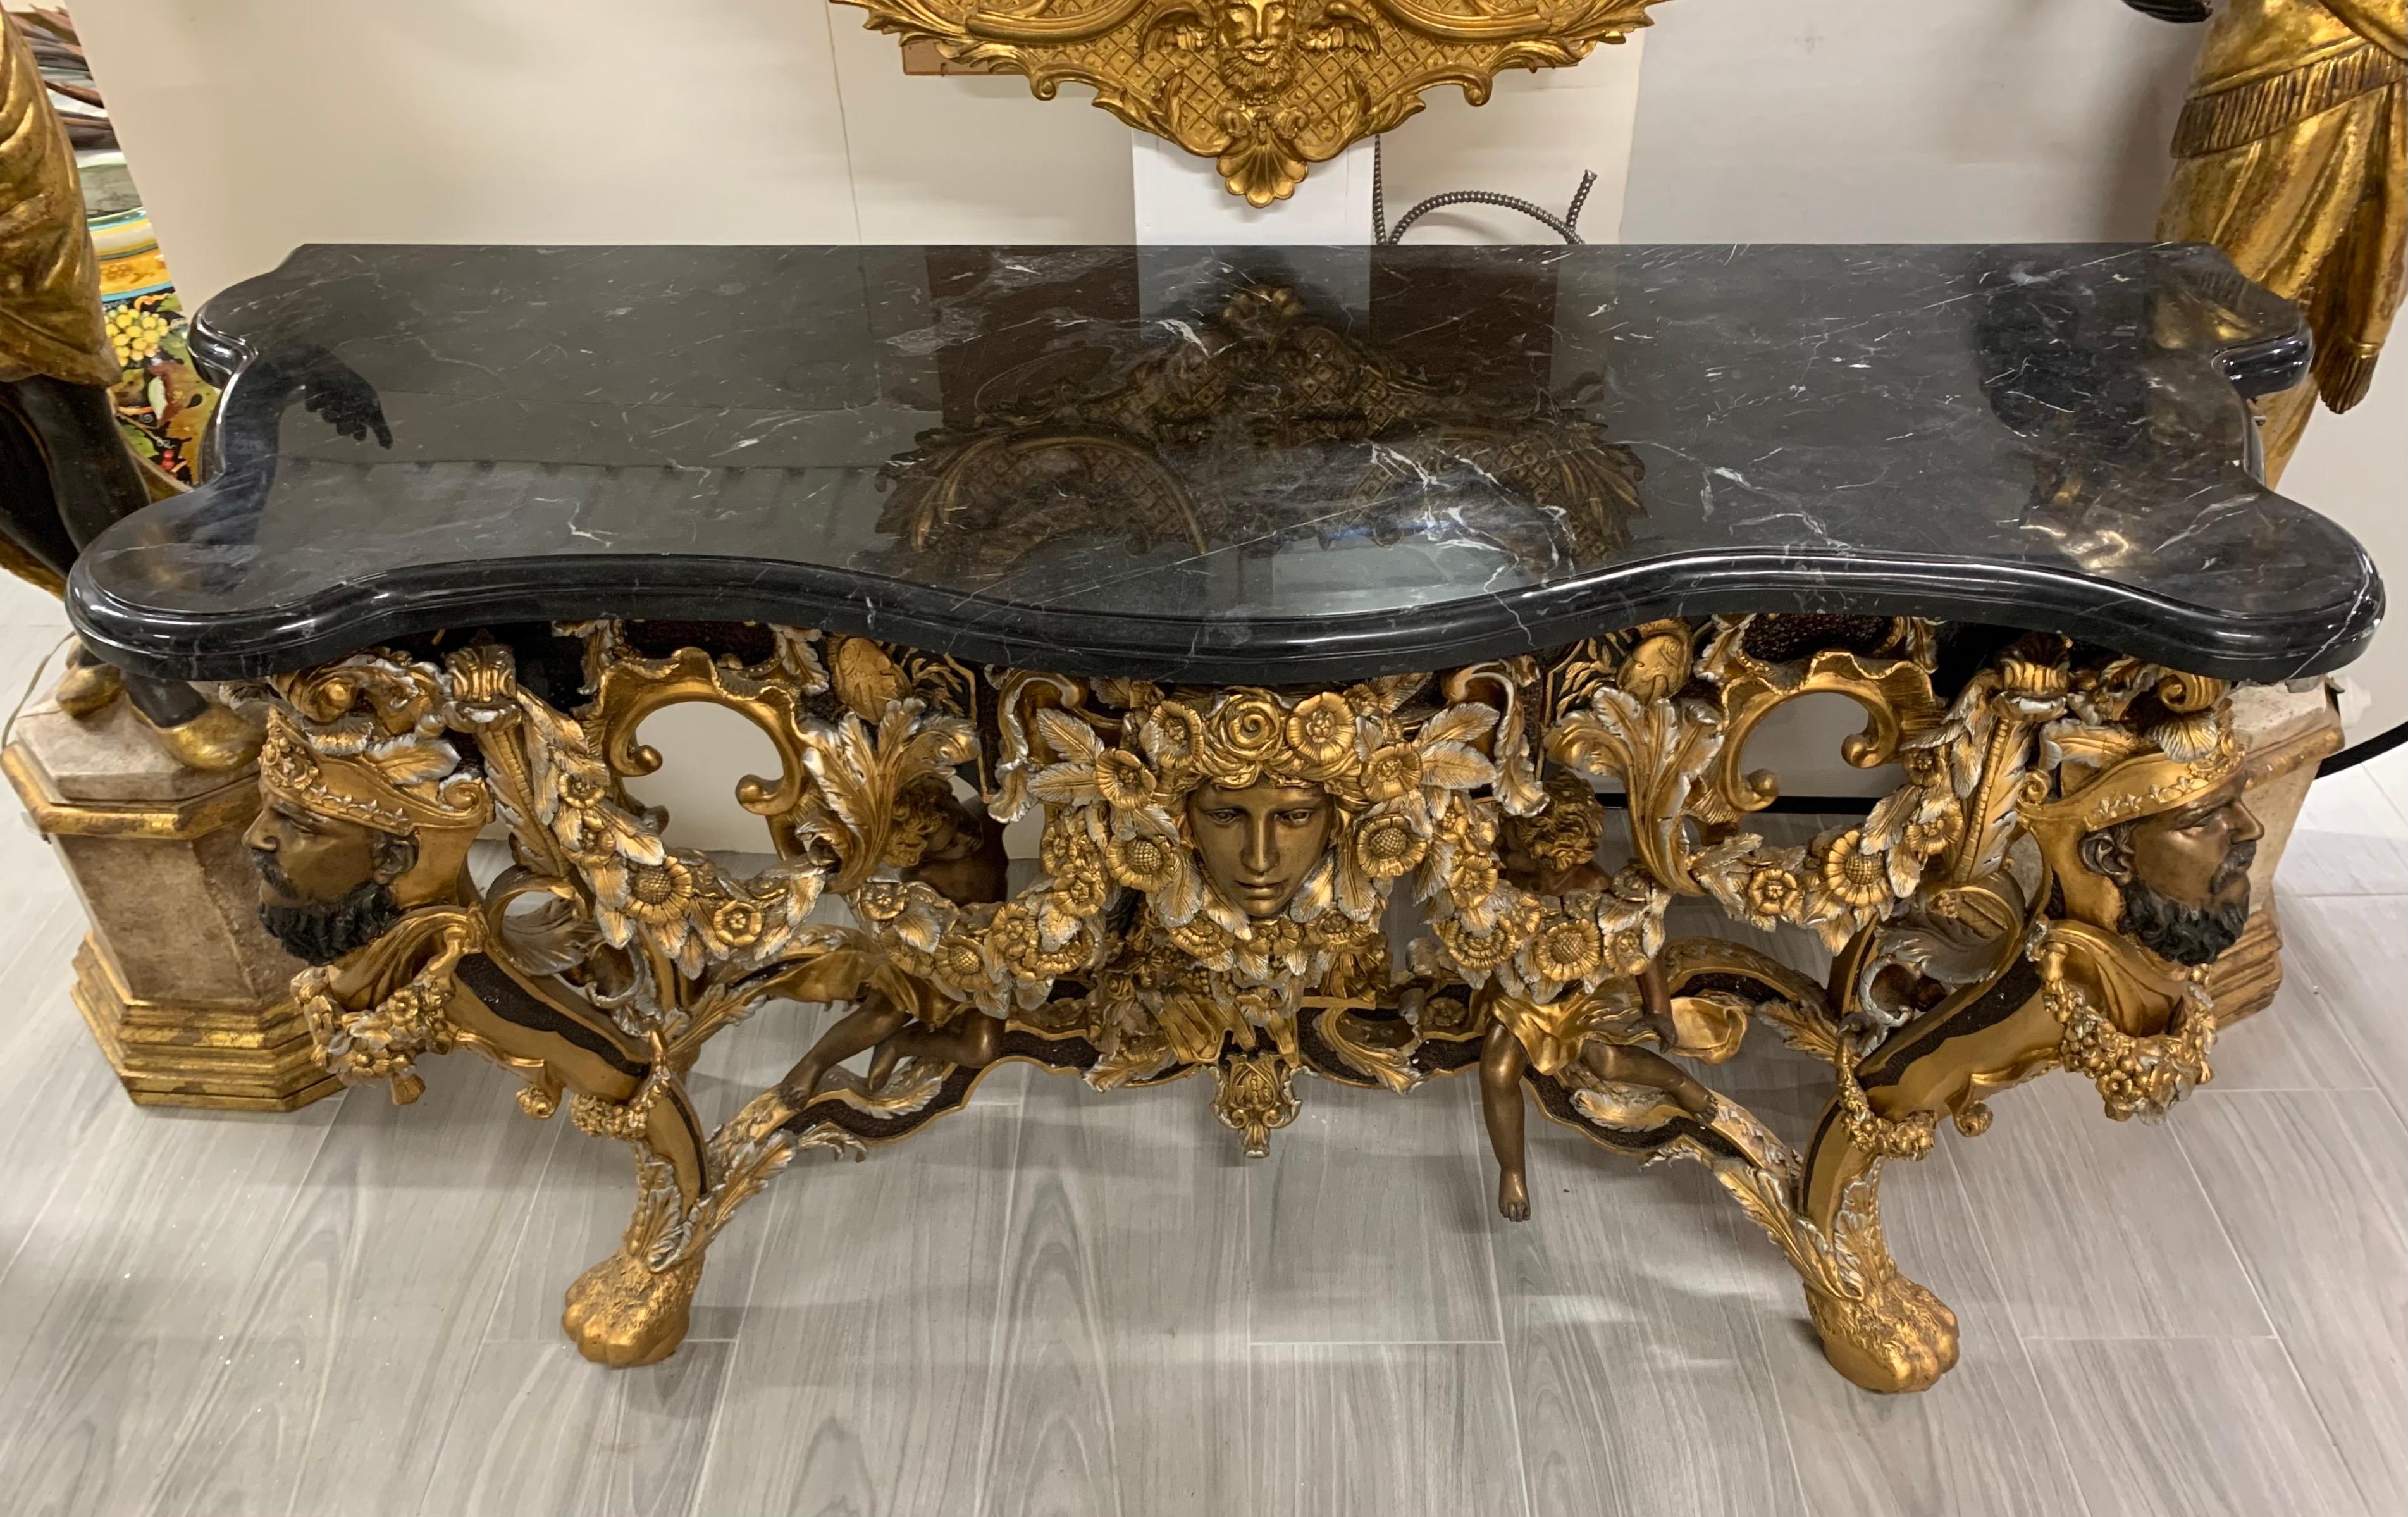 Exuberantly carved bronze console table features a detailed woman’s face in center and faces of soldiers on the four corners. The bottom stretcher has carved cherubs flaunting a soldier’s shield and armor. Intricate carved floral sprays cover the